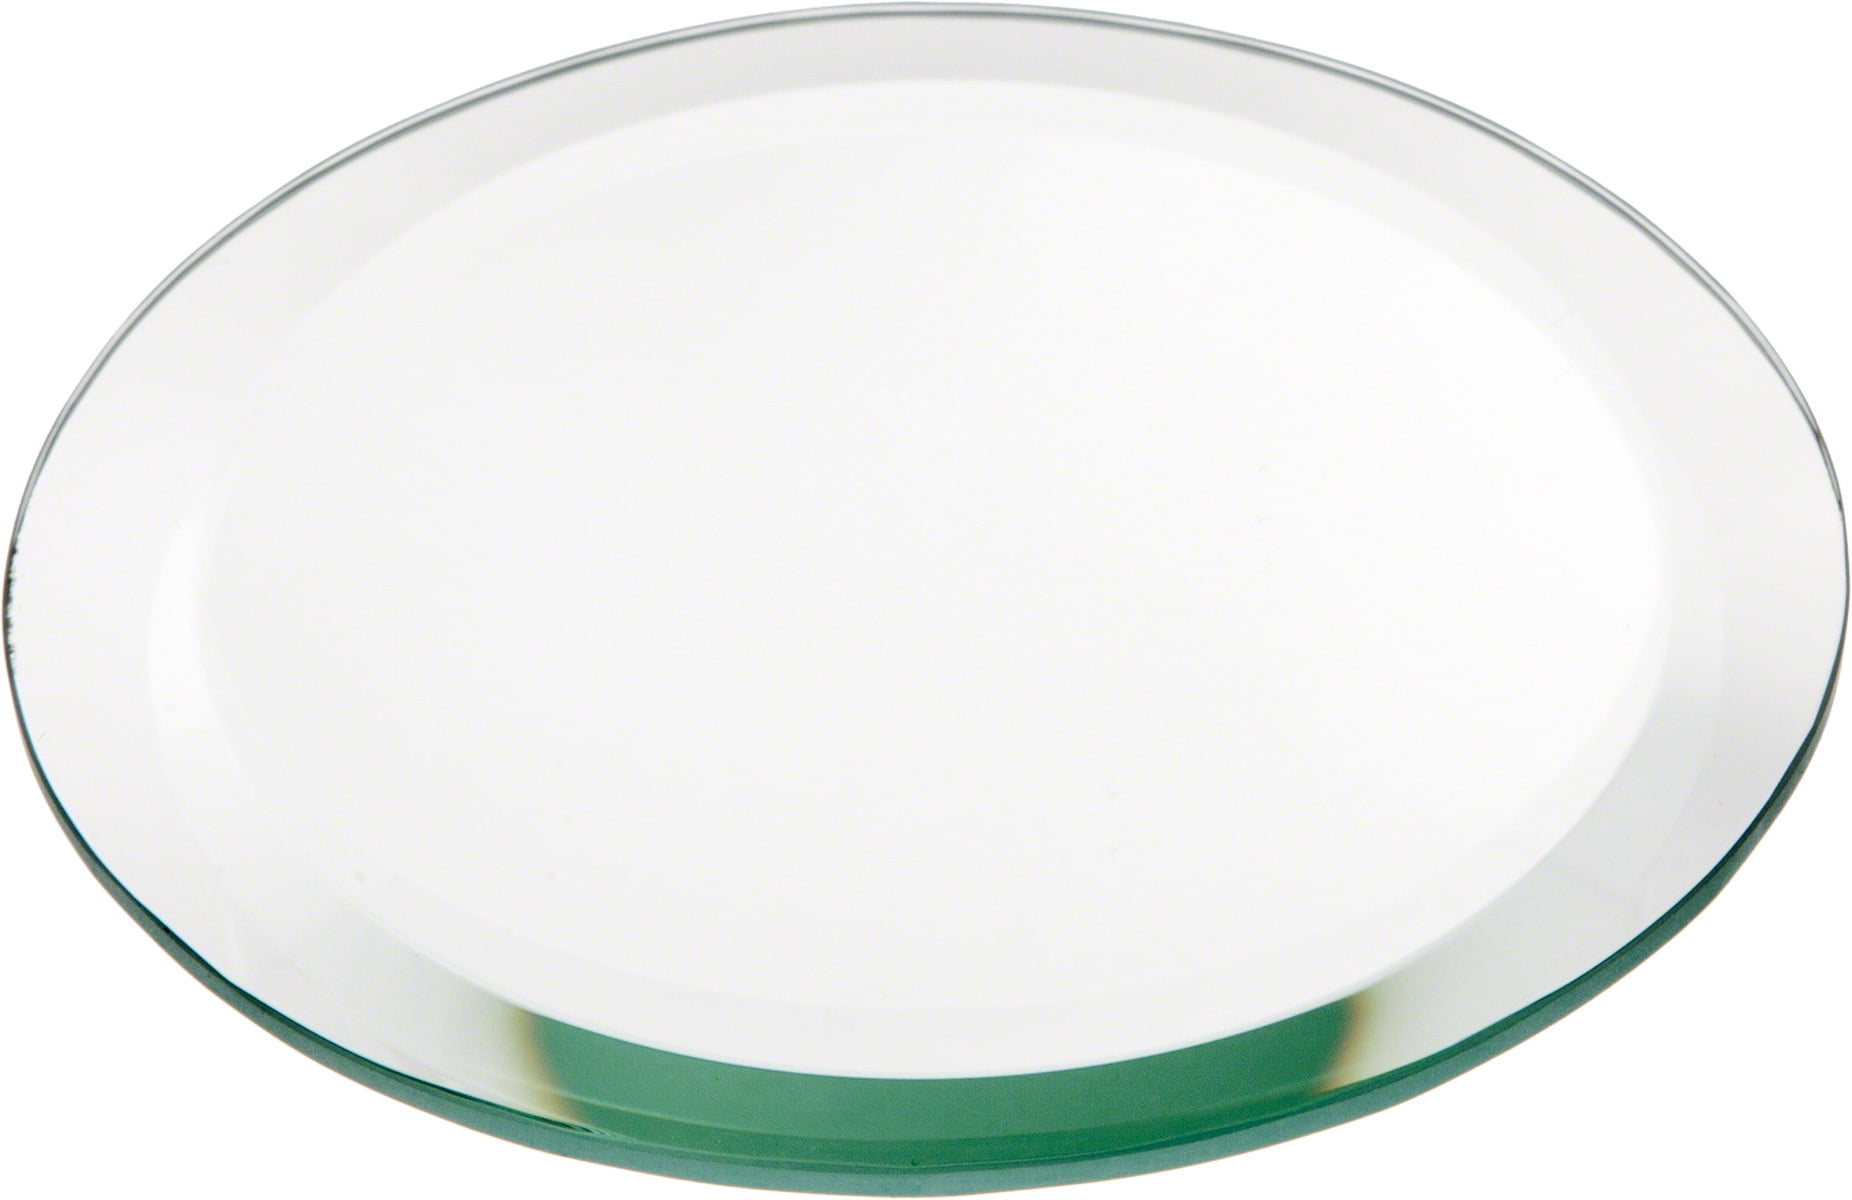 Plymor Round 3mm Beveled Glass Mirror 5 inch x 5 inch Pack of 12 